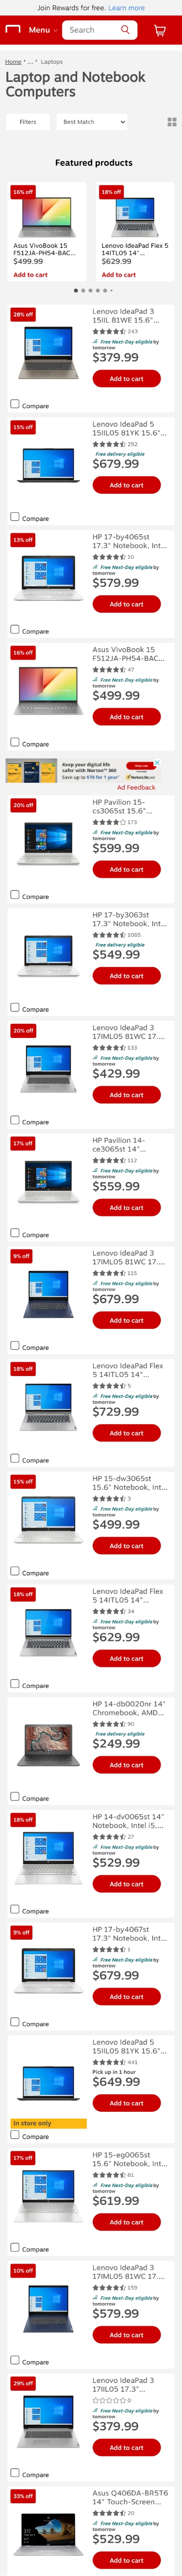 staples category page mobile